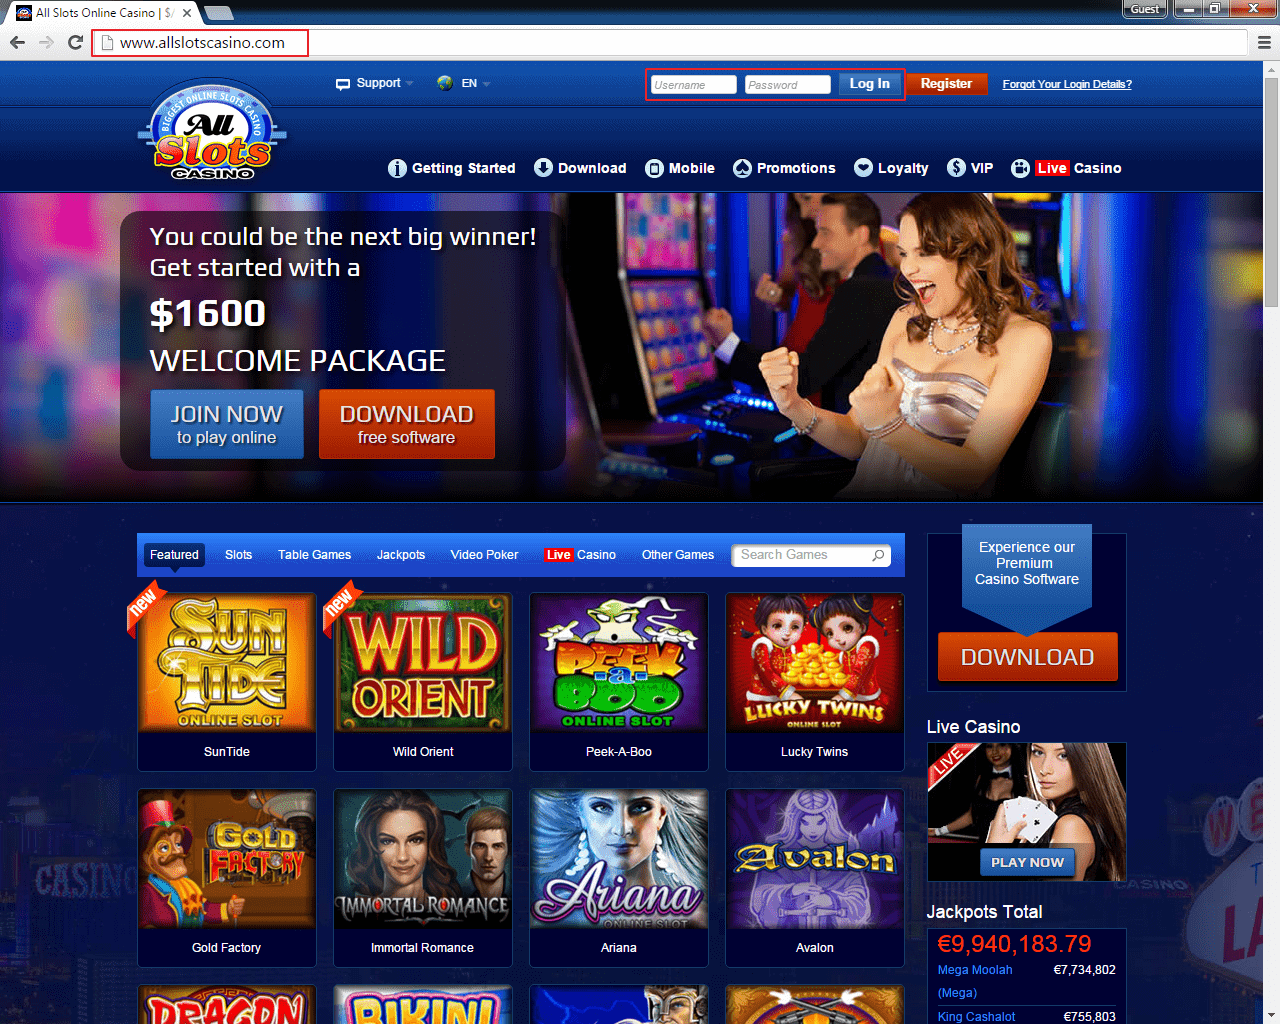 Online casino for sale max slots максбет слотс2 ксыз0 1